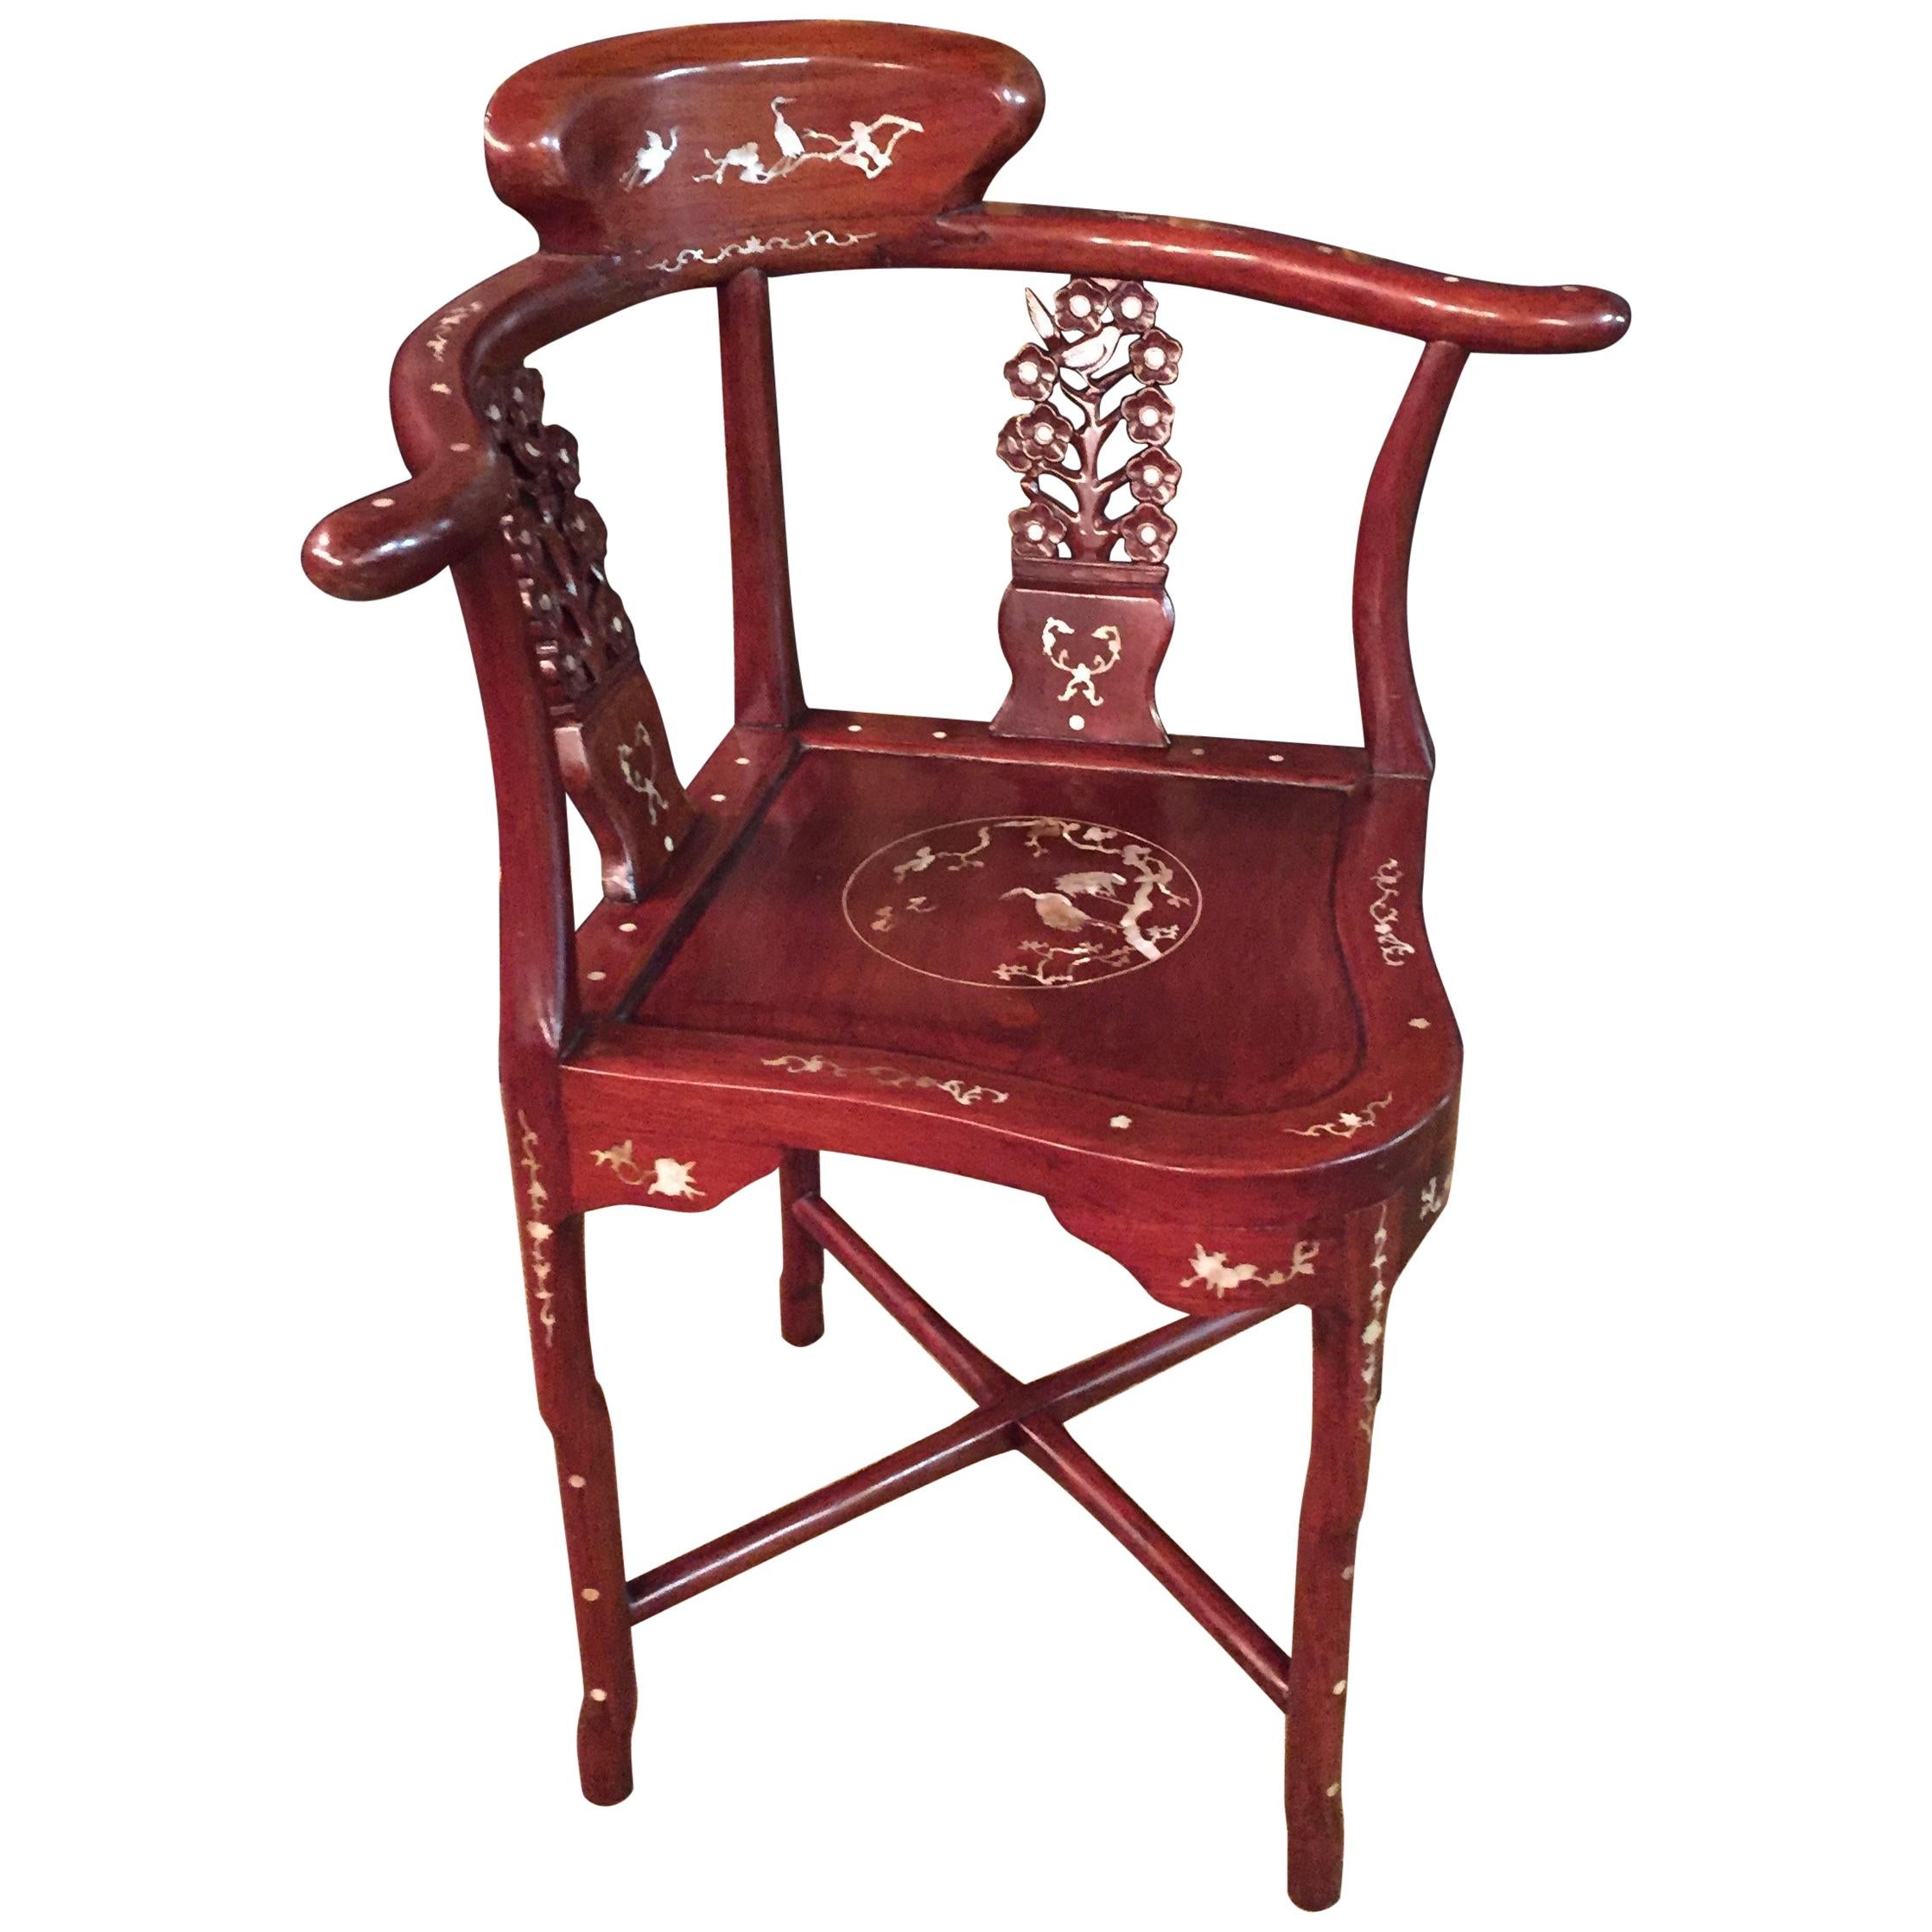 China Corner Chair with Mother of pearl Inlays